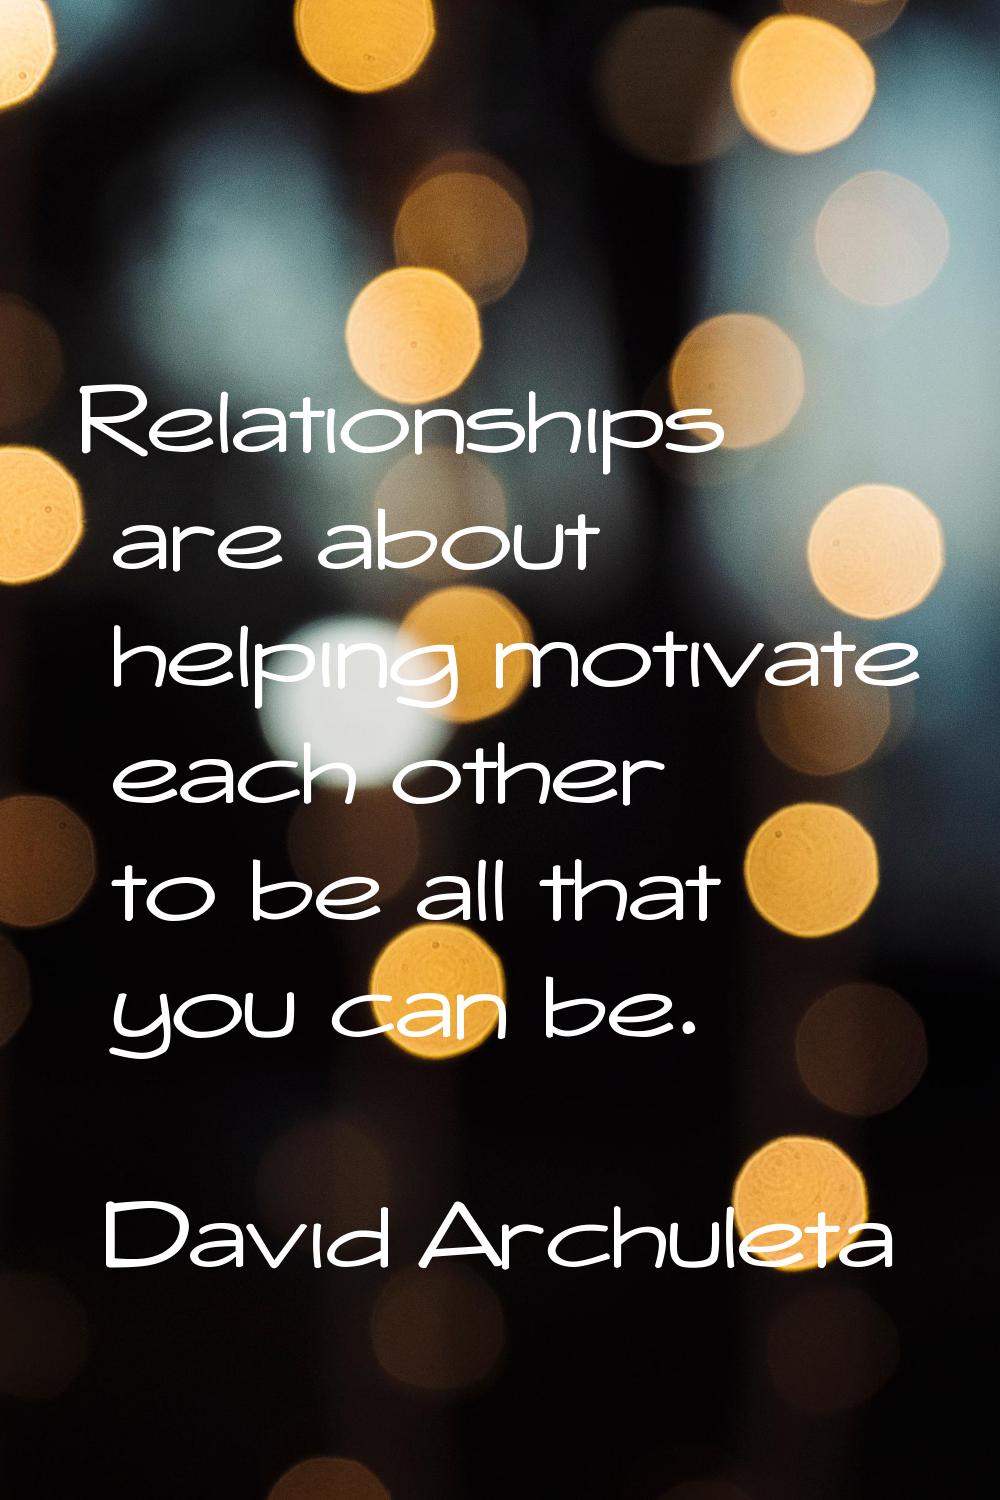 Relationships are about helping motivate each other to be all that you can be.